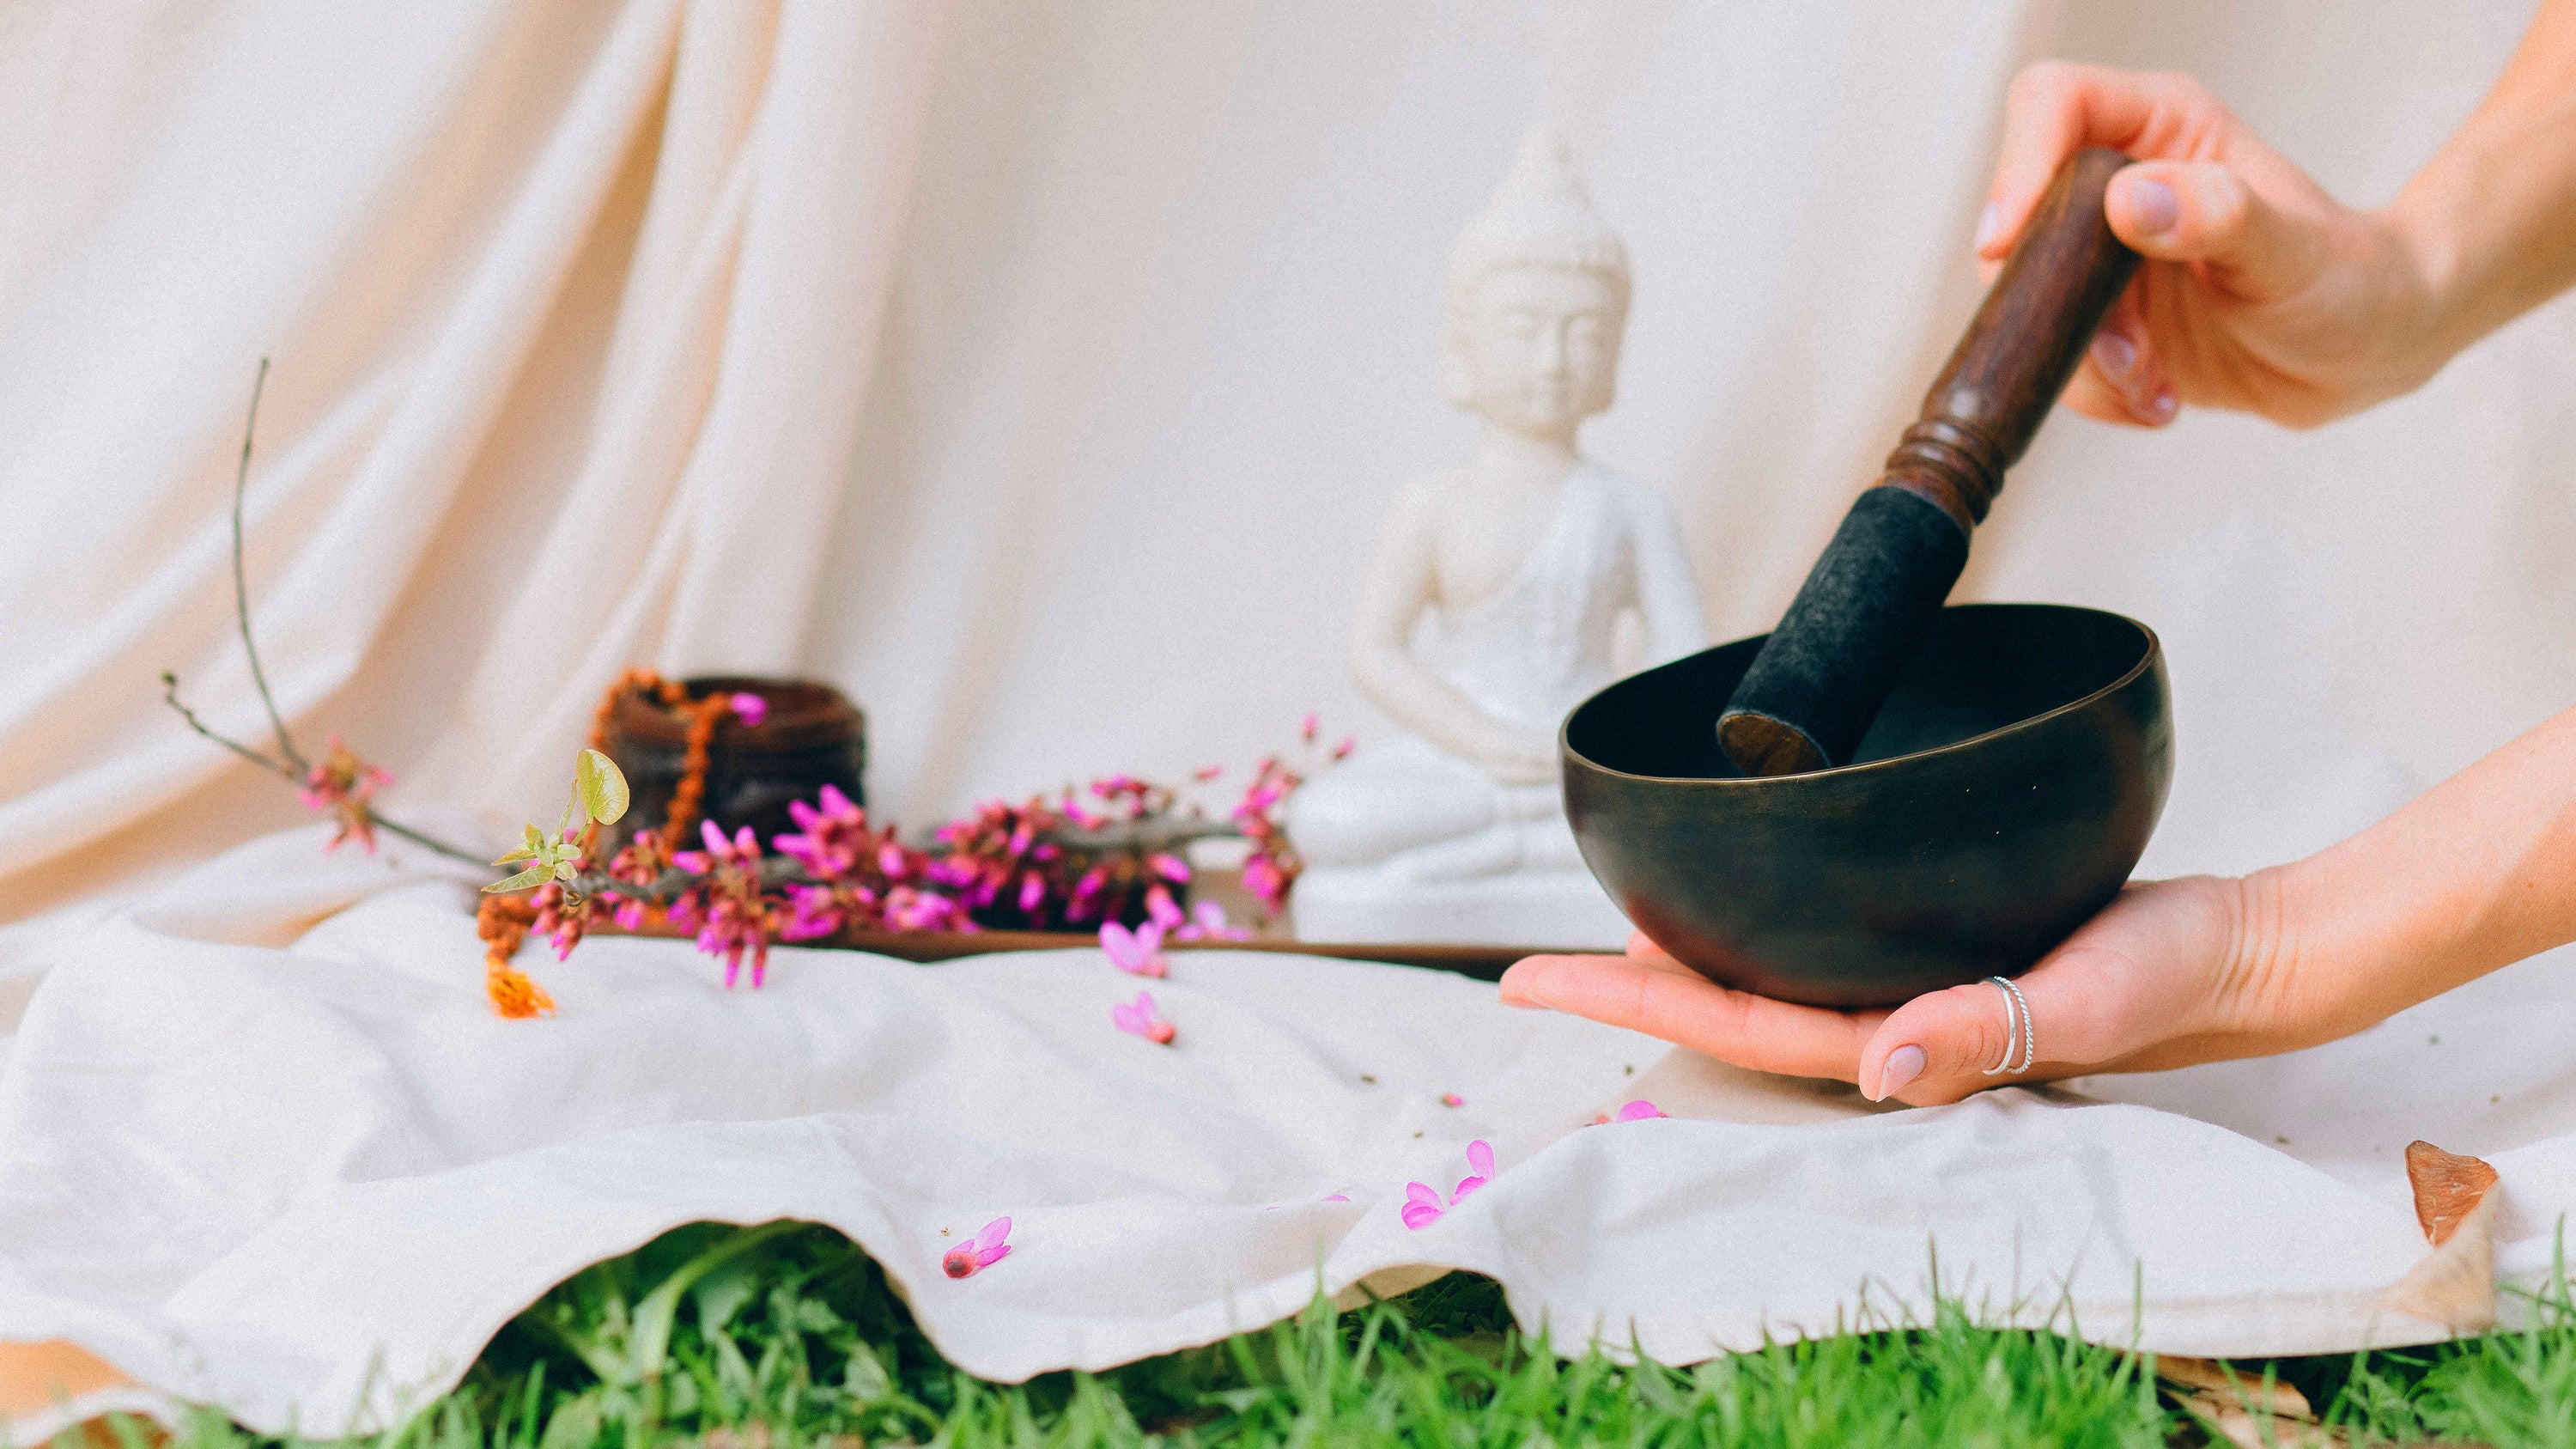 A close shot of a sound bowl being played with a mallet with a buddha statue and bed sheet in the background.